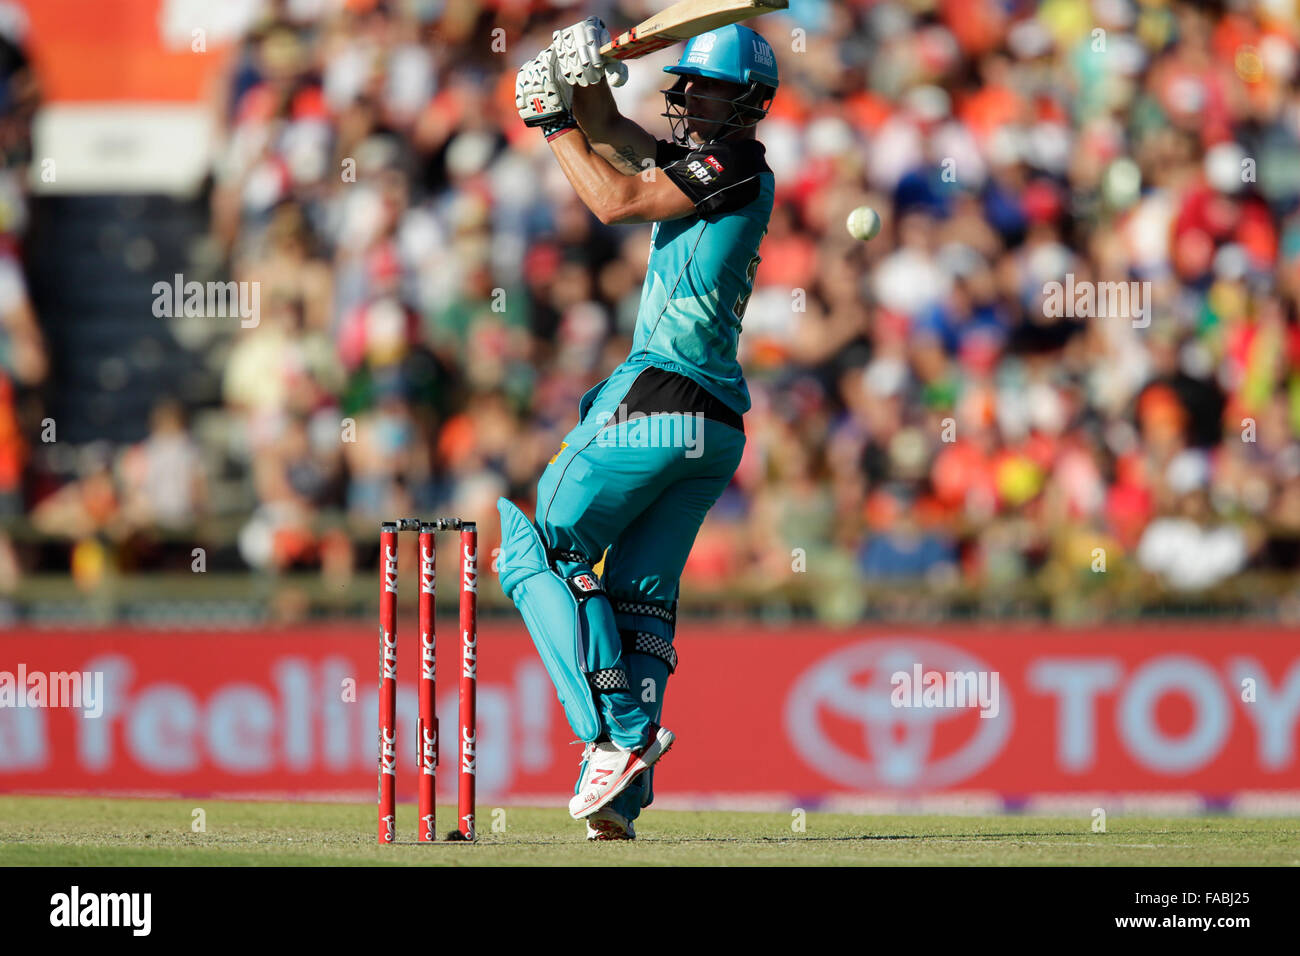 26.12.2015. Perth, Australia. Big Bash Cricker League 05, Perth Scorchers versus Brisbane Heat. Chris Lynn steps outside his off stump to play at the ball during his innings. Stock Photo